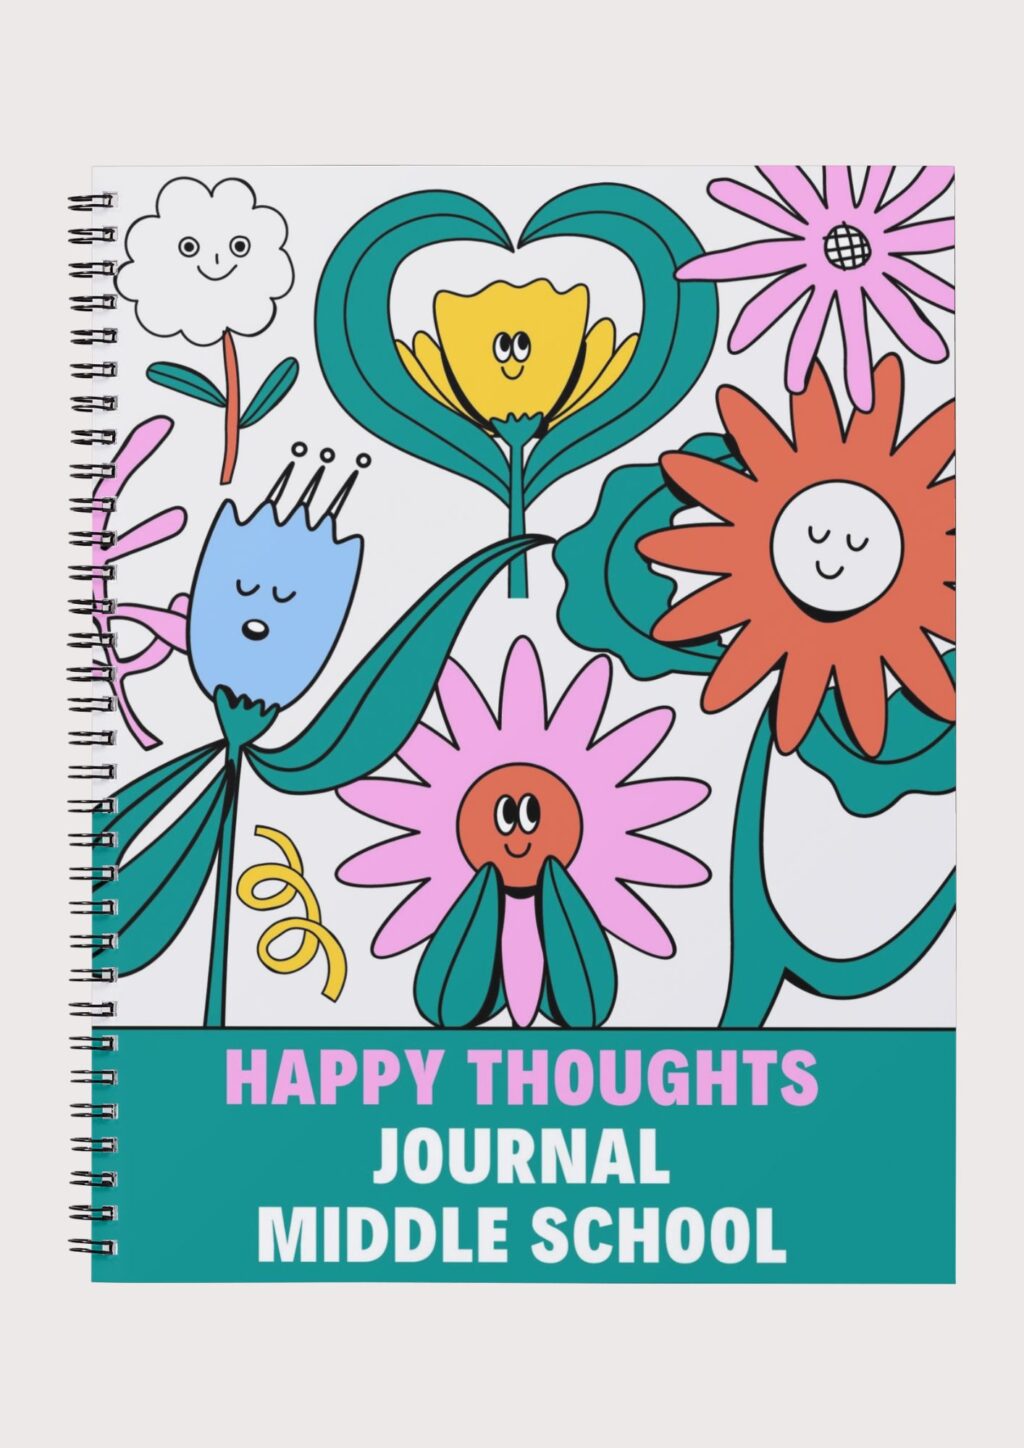 These journal prompts for middle school will be perfect for your group of students or even your kids. My journal was a safe space where I could express my thoughts, dreams, and even my worries. Get a FREE printable journal to use with your students and kids!